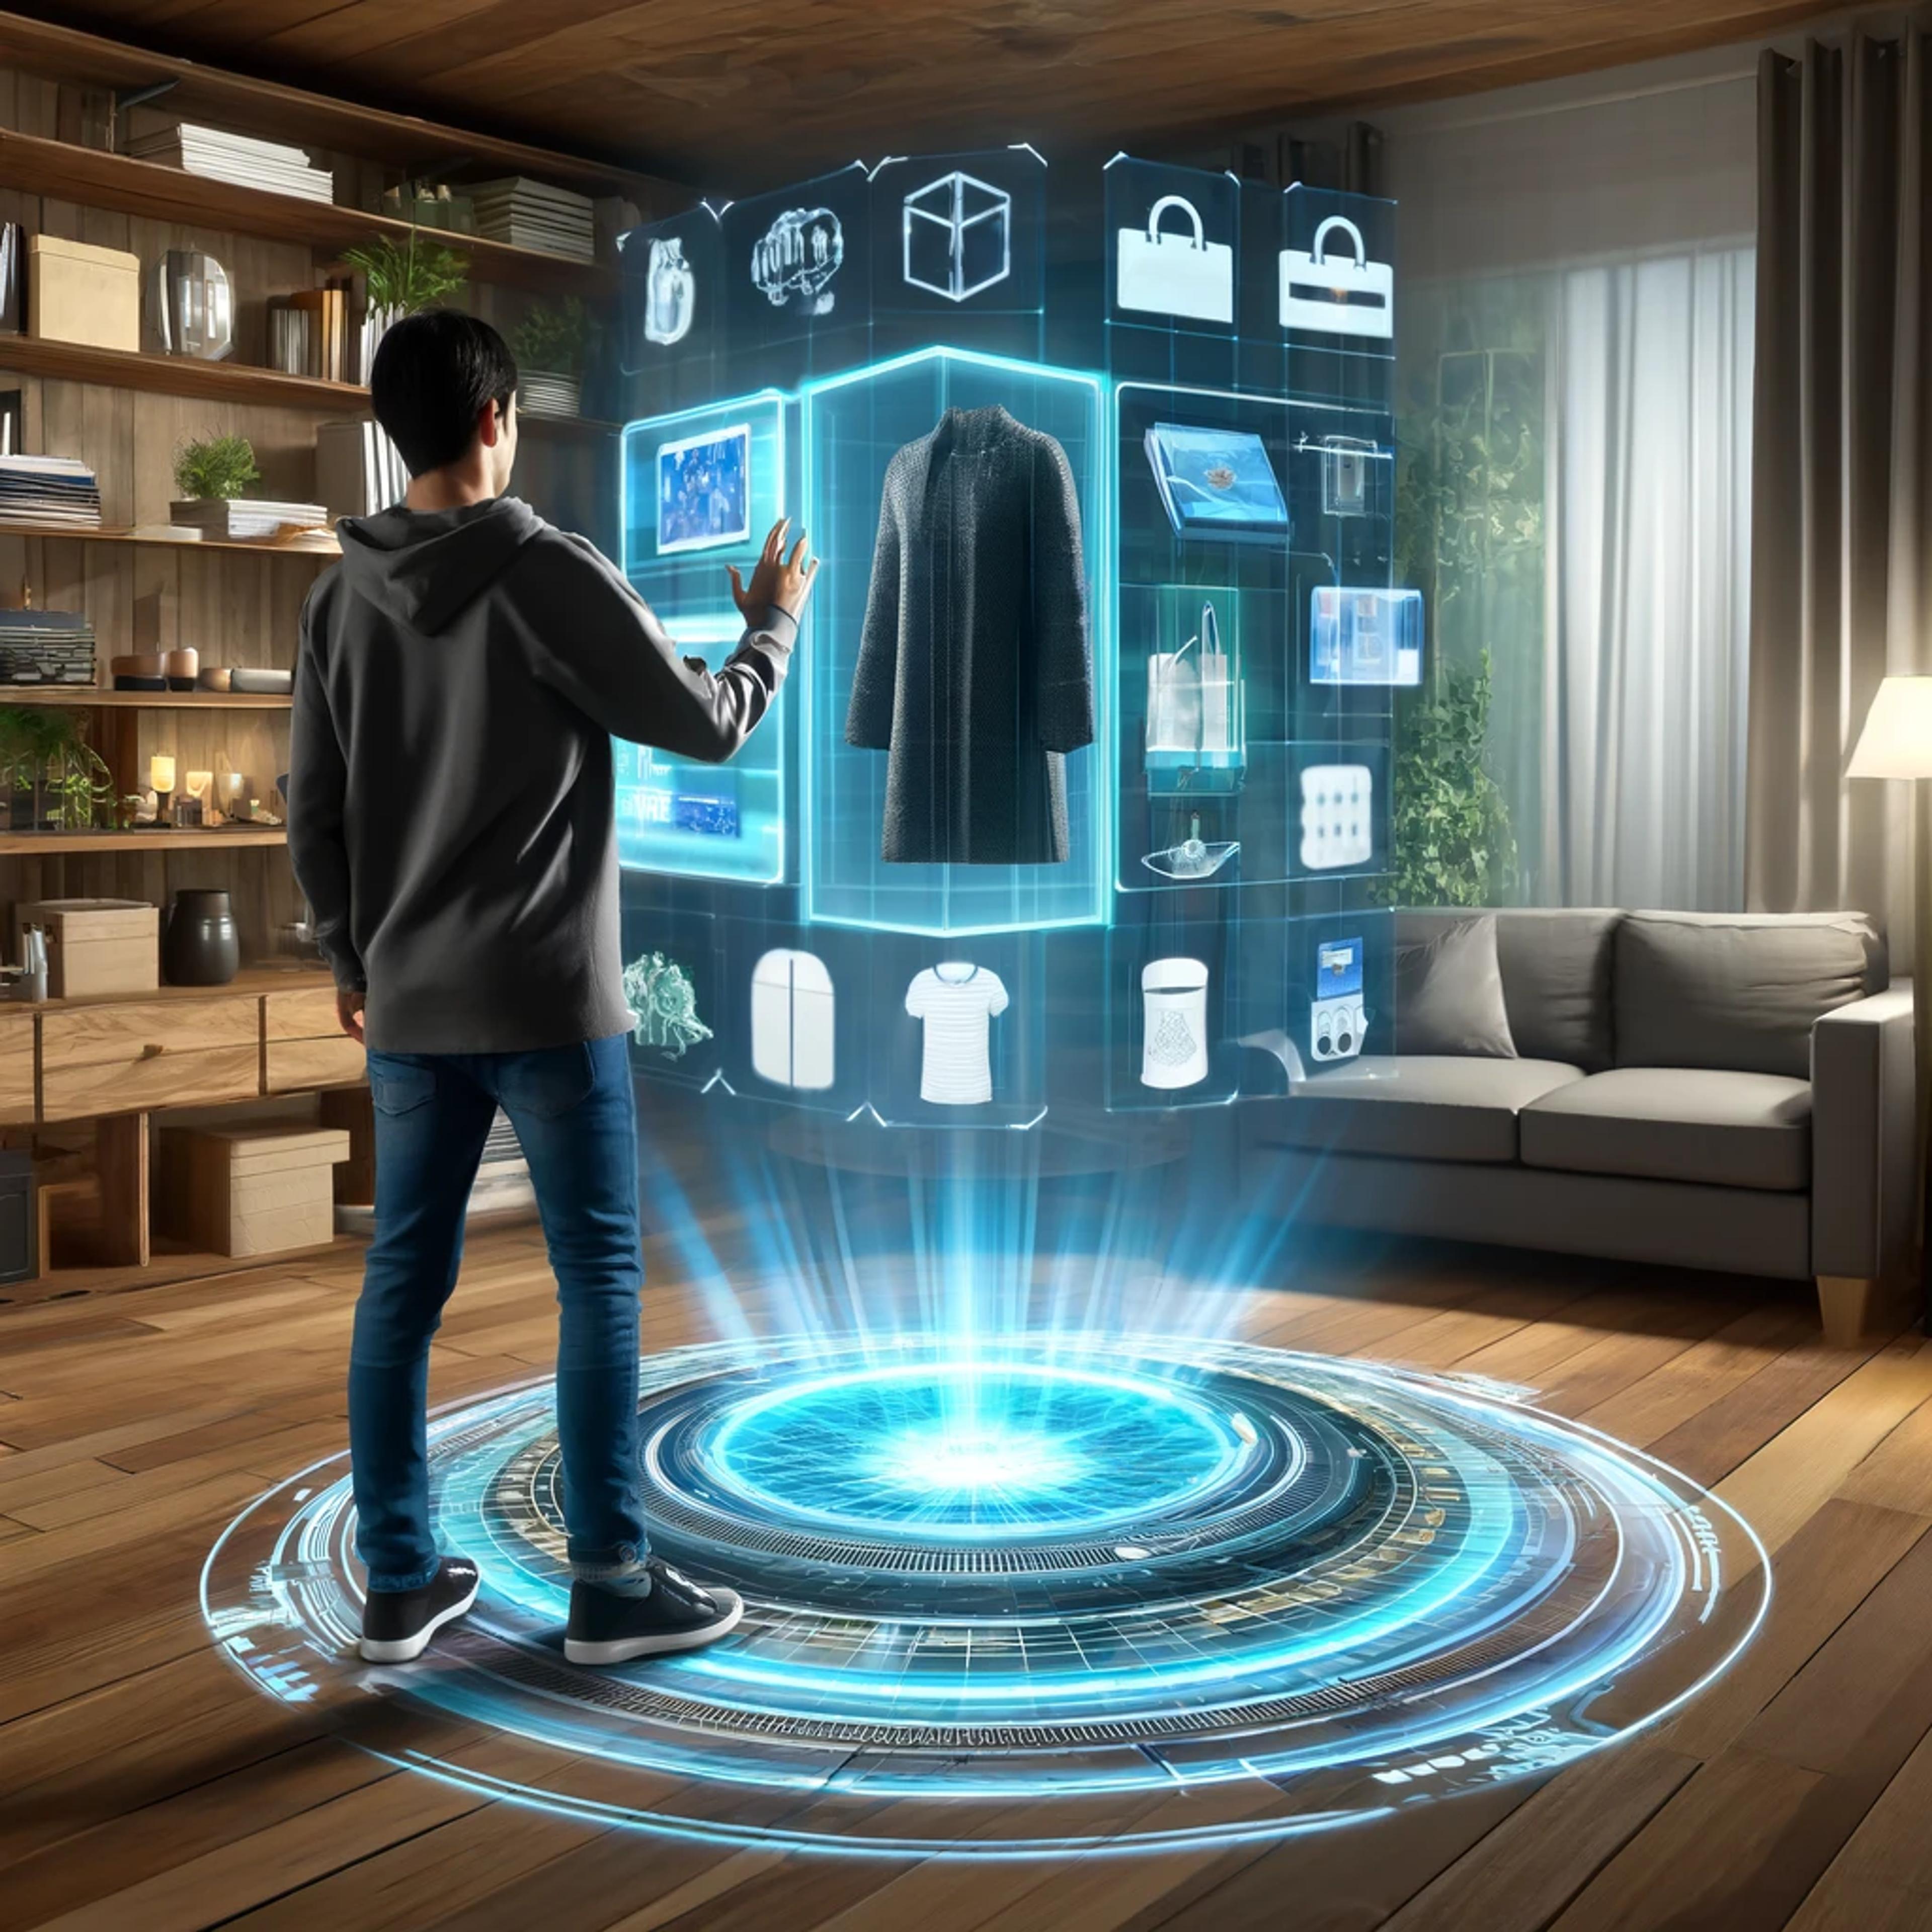 User interacts with 3D holographic product displays in a modern living room setting.